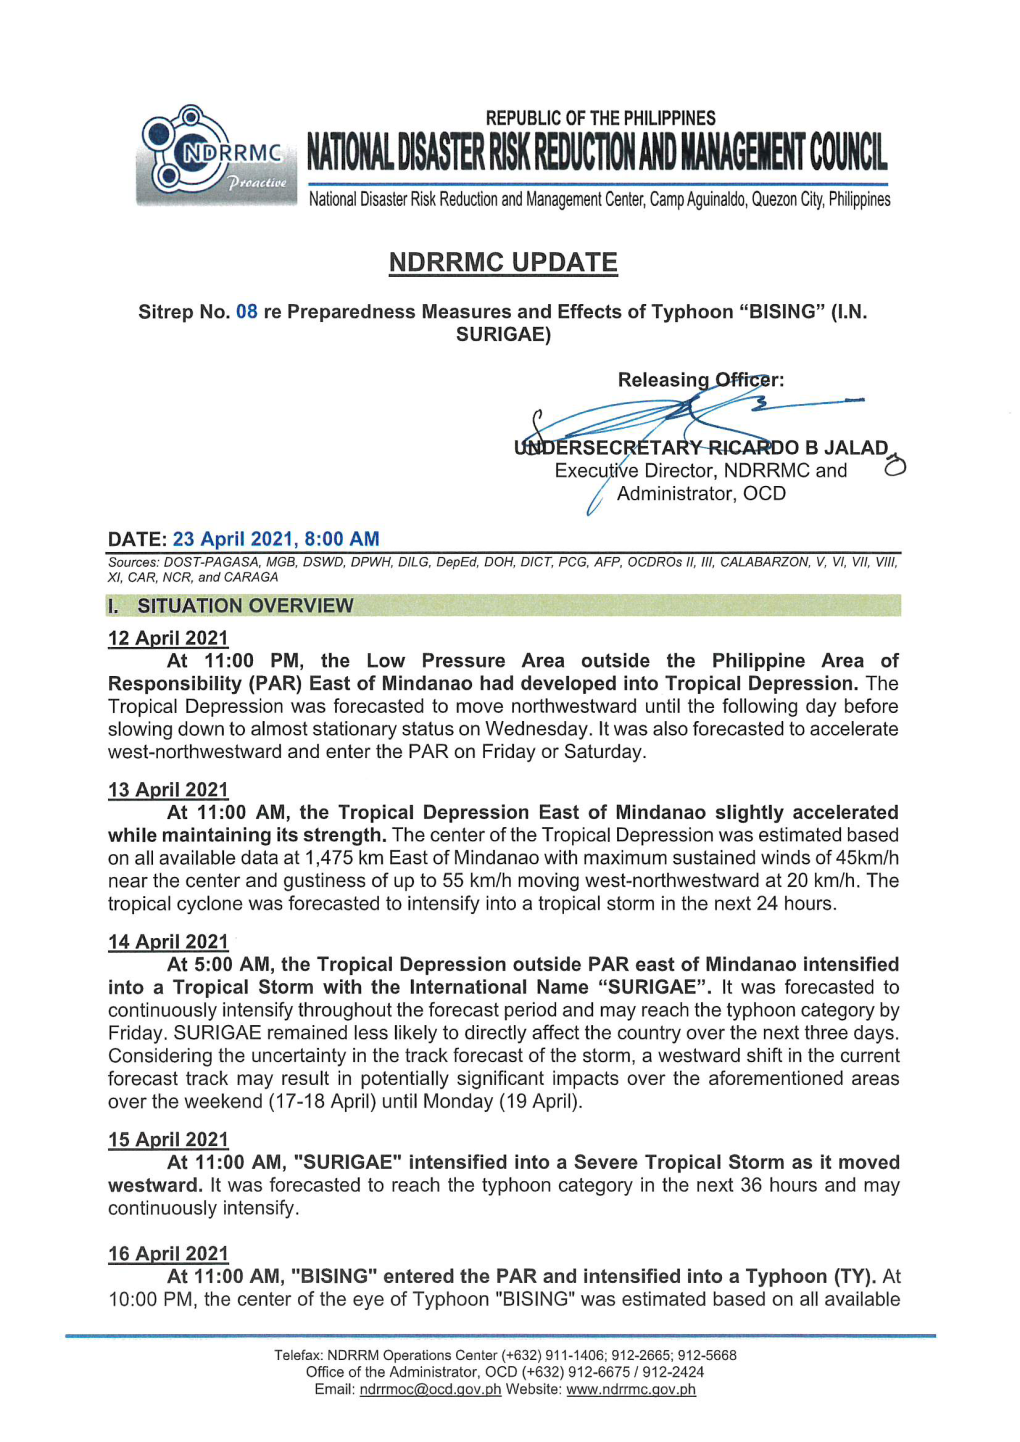 Sitrep No. 08 Re Preparedness Measures and Effects for Typhoon BISING